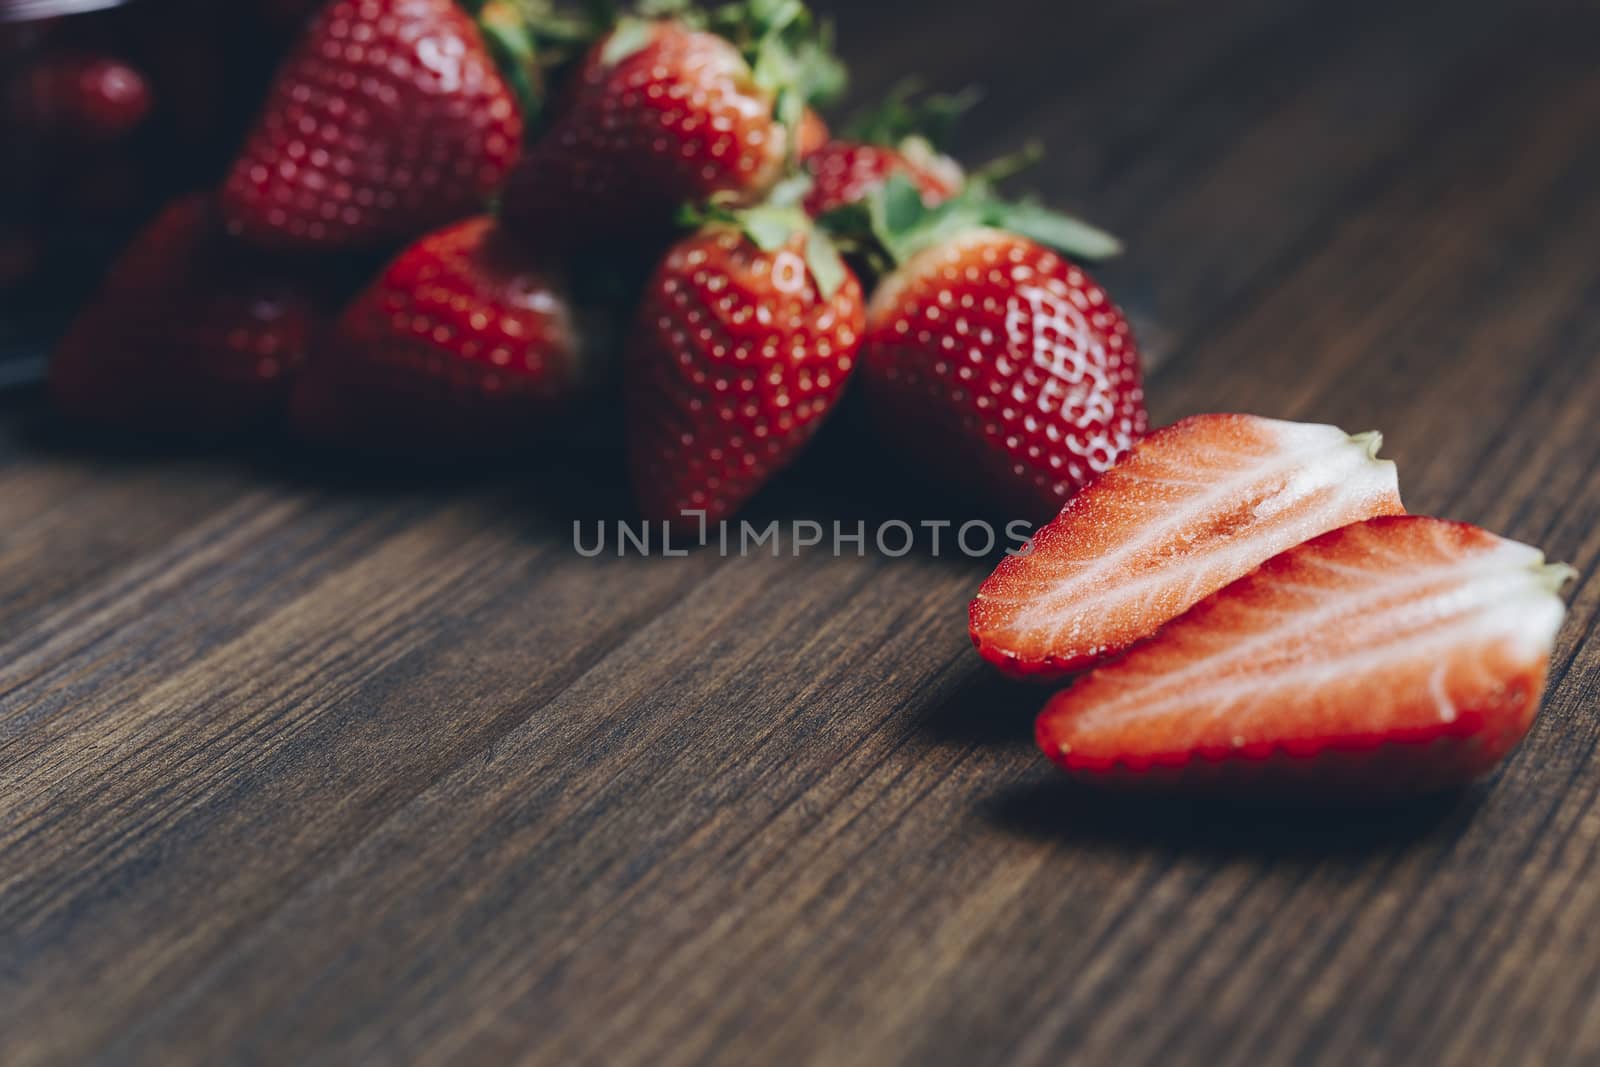 Fresh and juicy strawberries on wooden background in rustic style, healthy sweet food, vitamins and fruity concept. Copy space for text